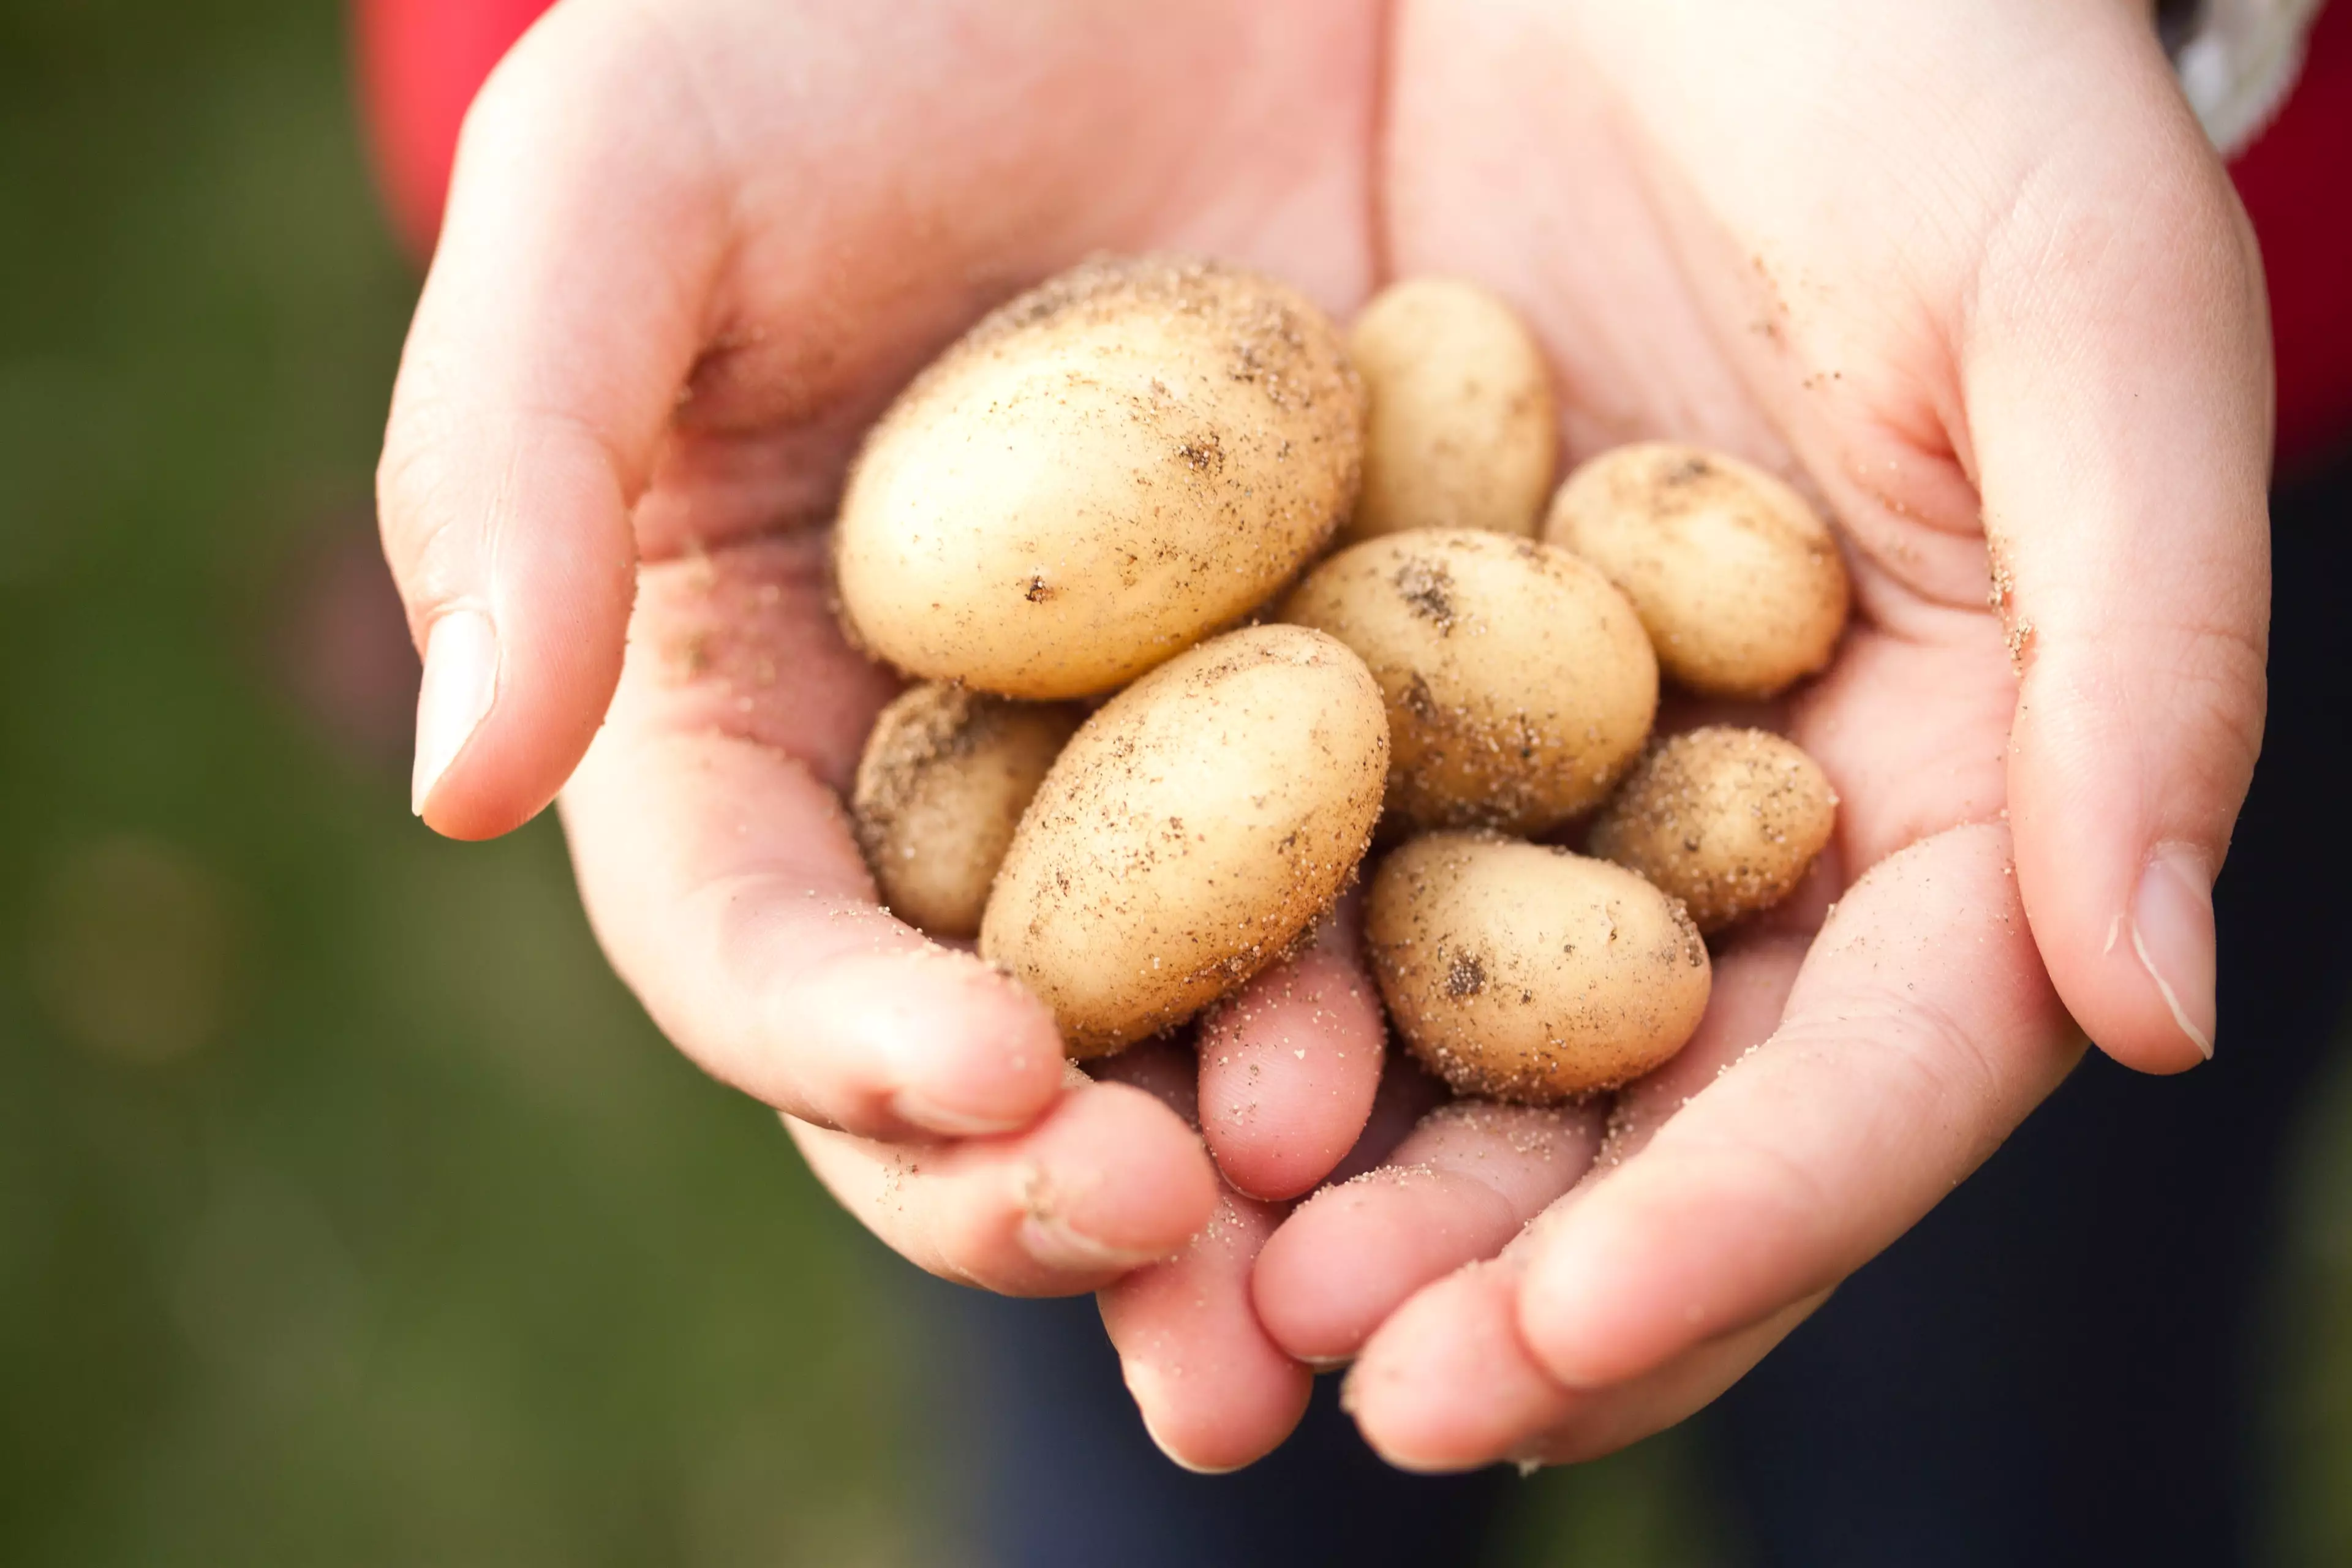 The regular spud is another good source of potassium when the skin is kept on.